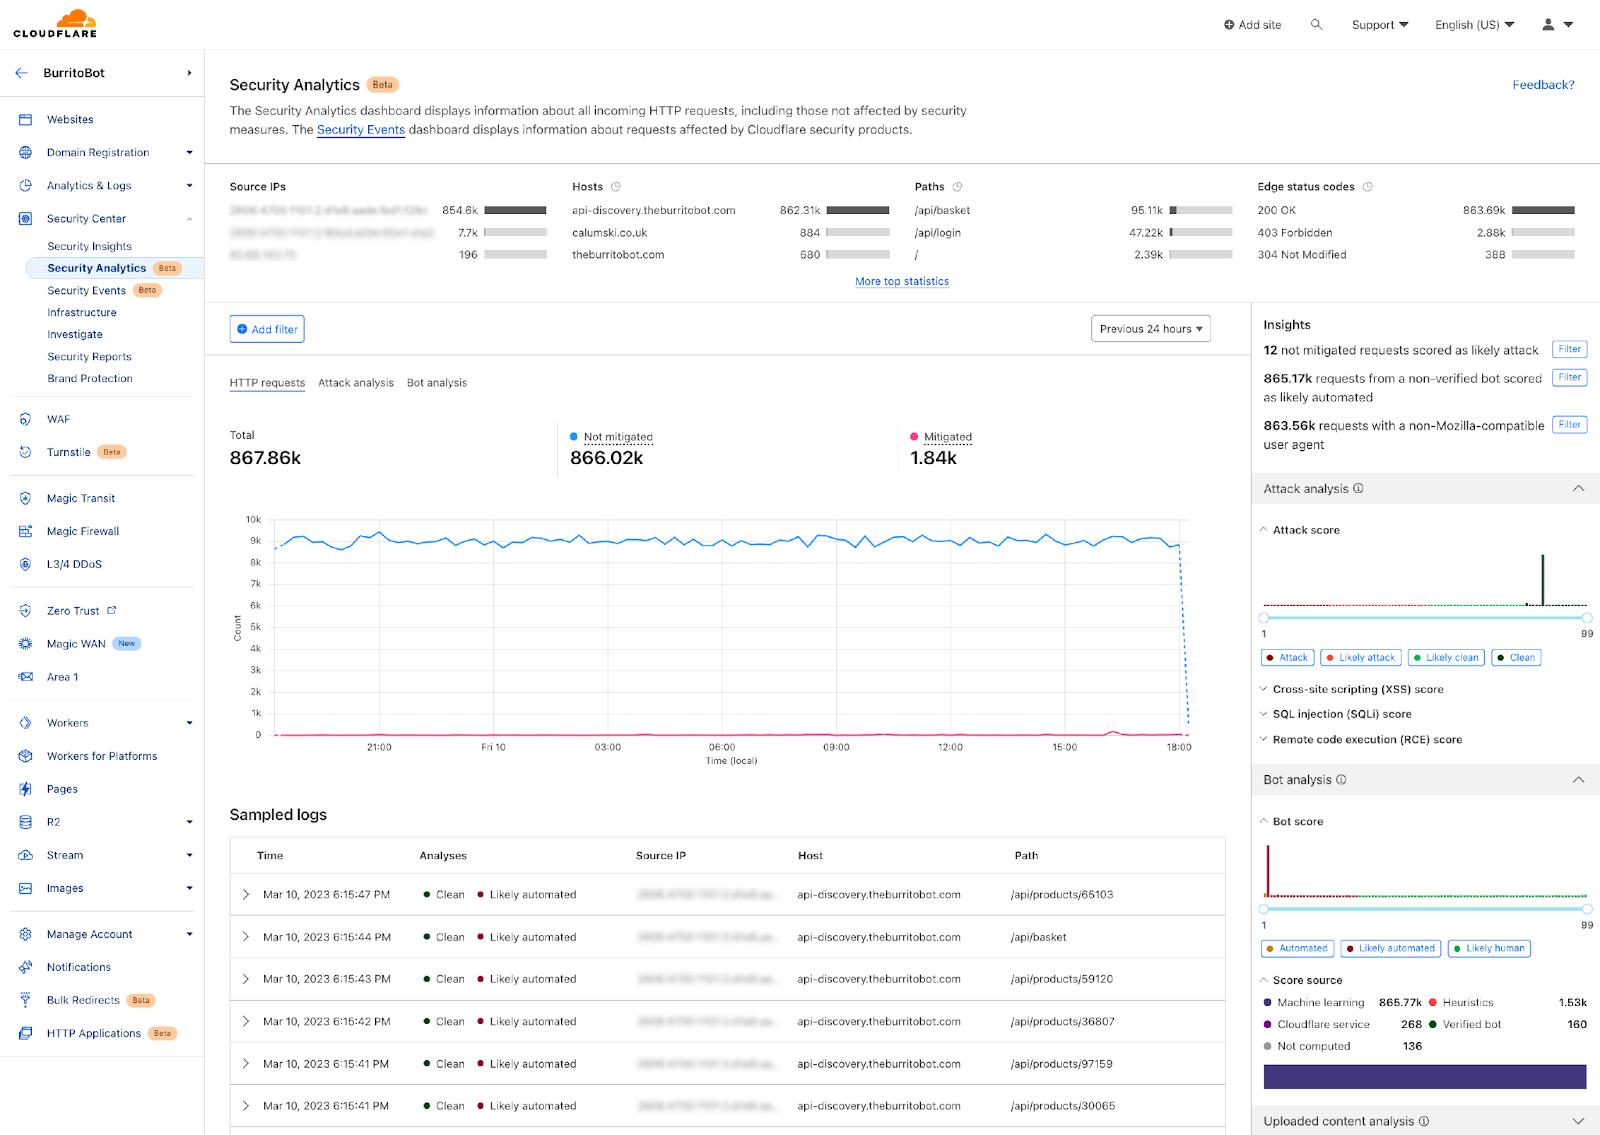 Account Security Analytics and Events: better visibility over all domains